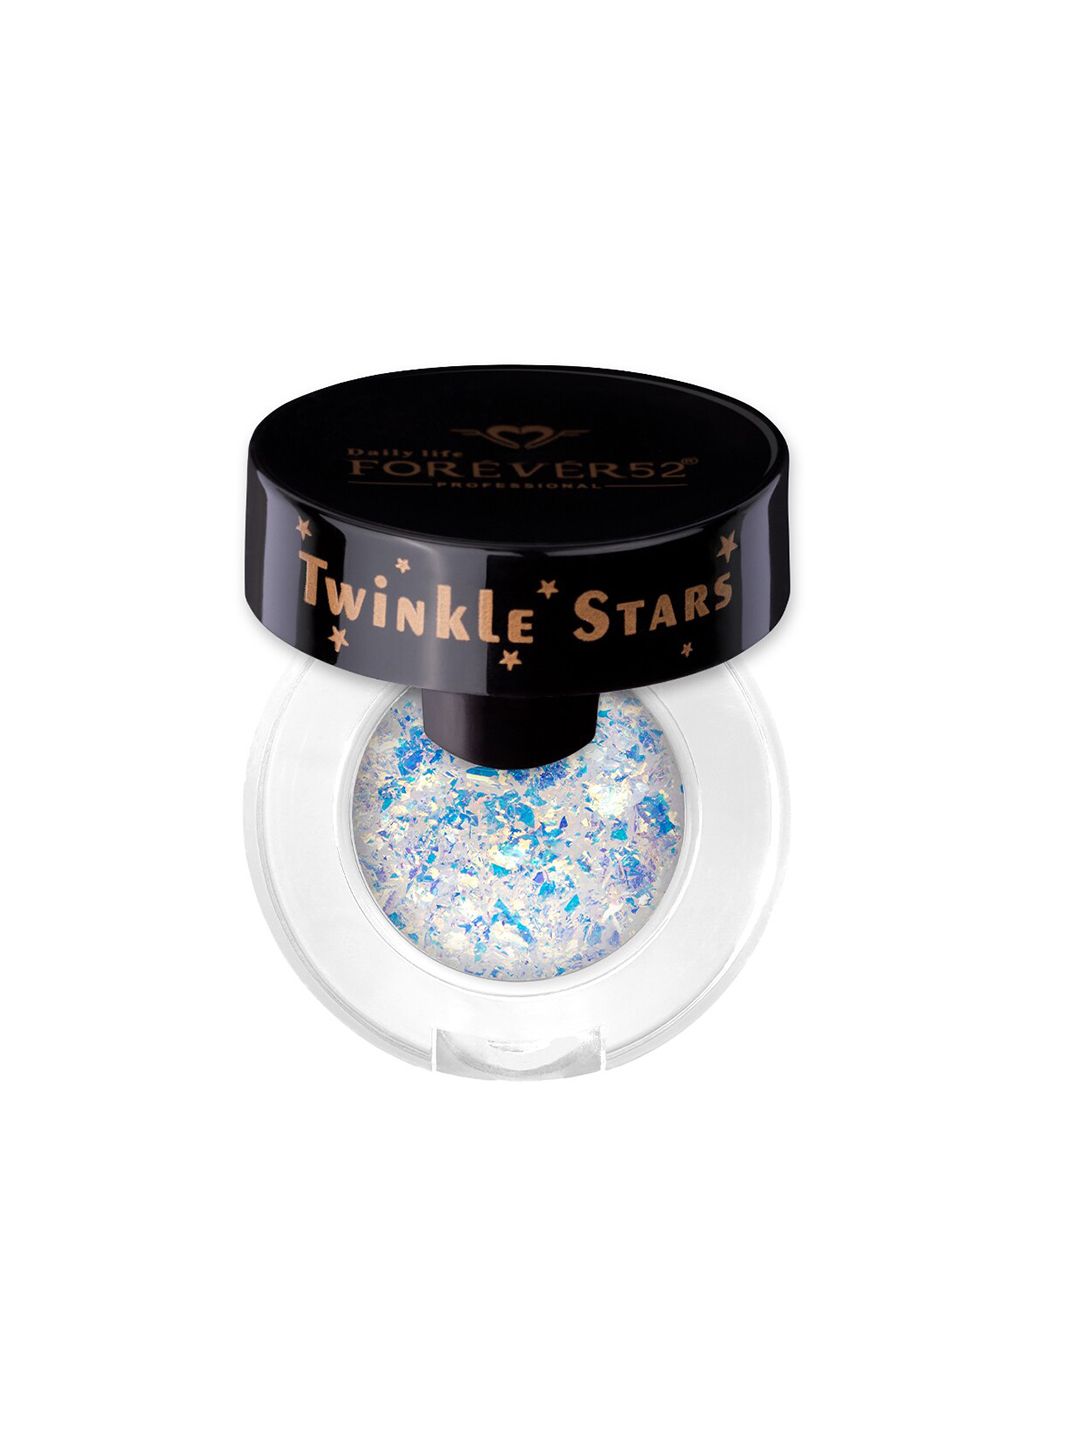 Daily Life Forever52 Twinkle Star Flakes Eyeshadow - TF008 Price in India